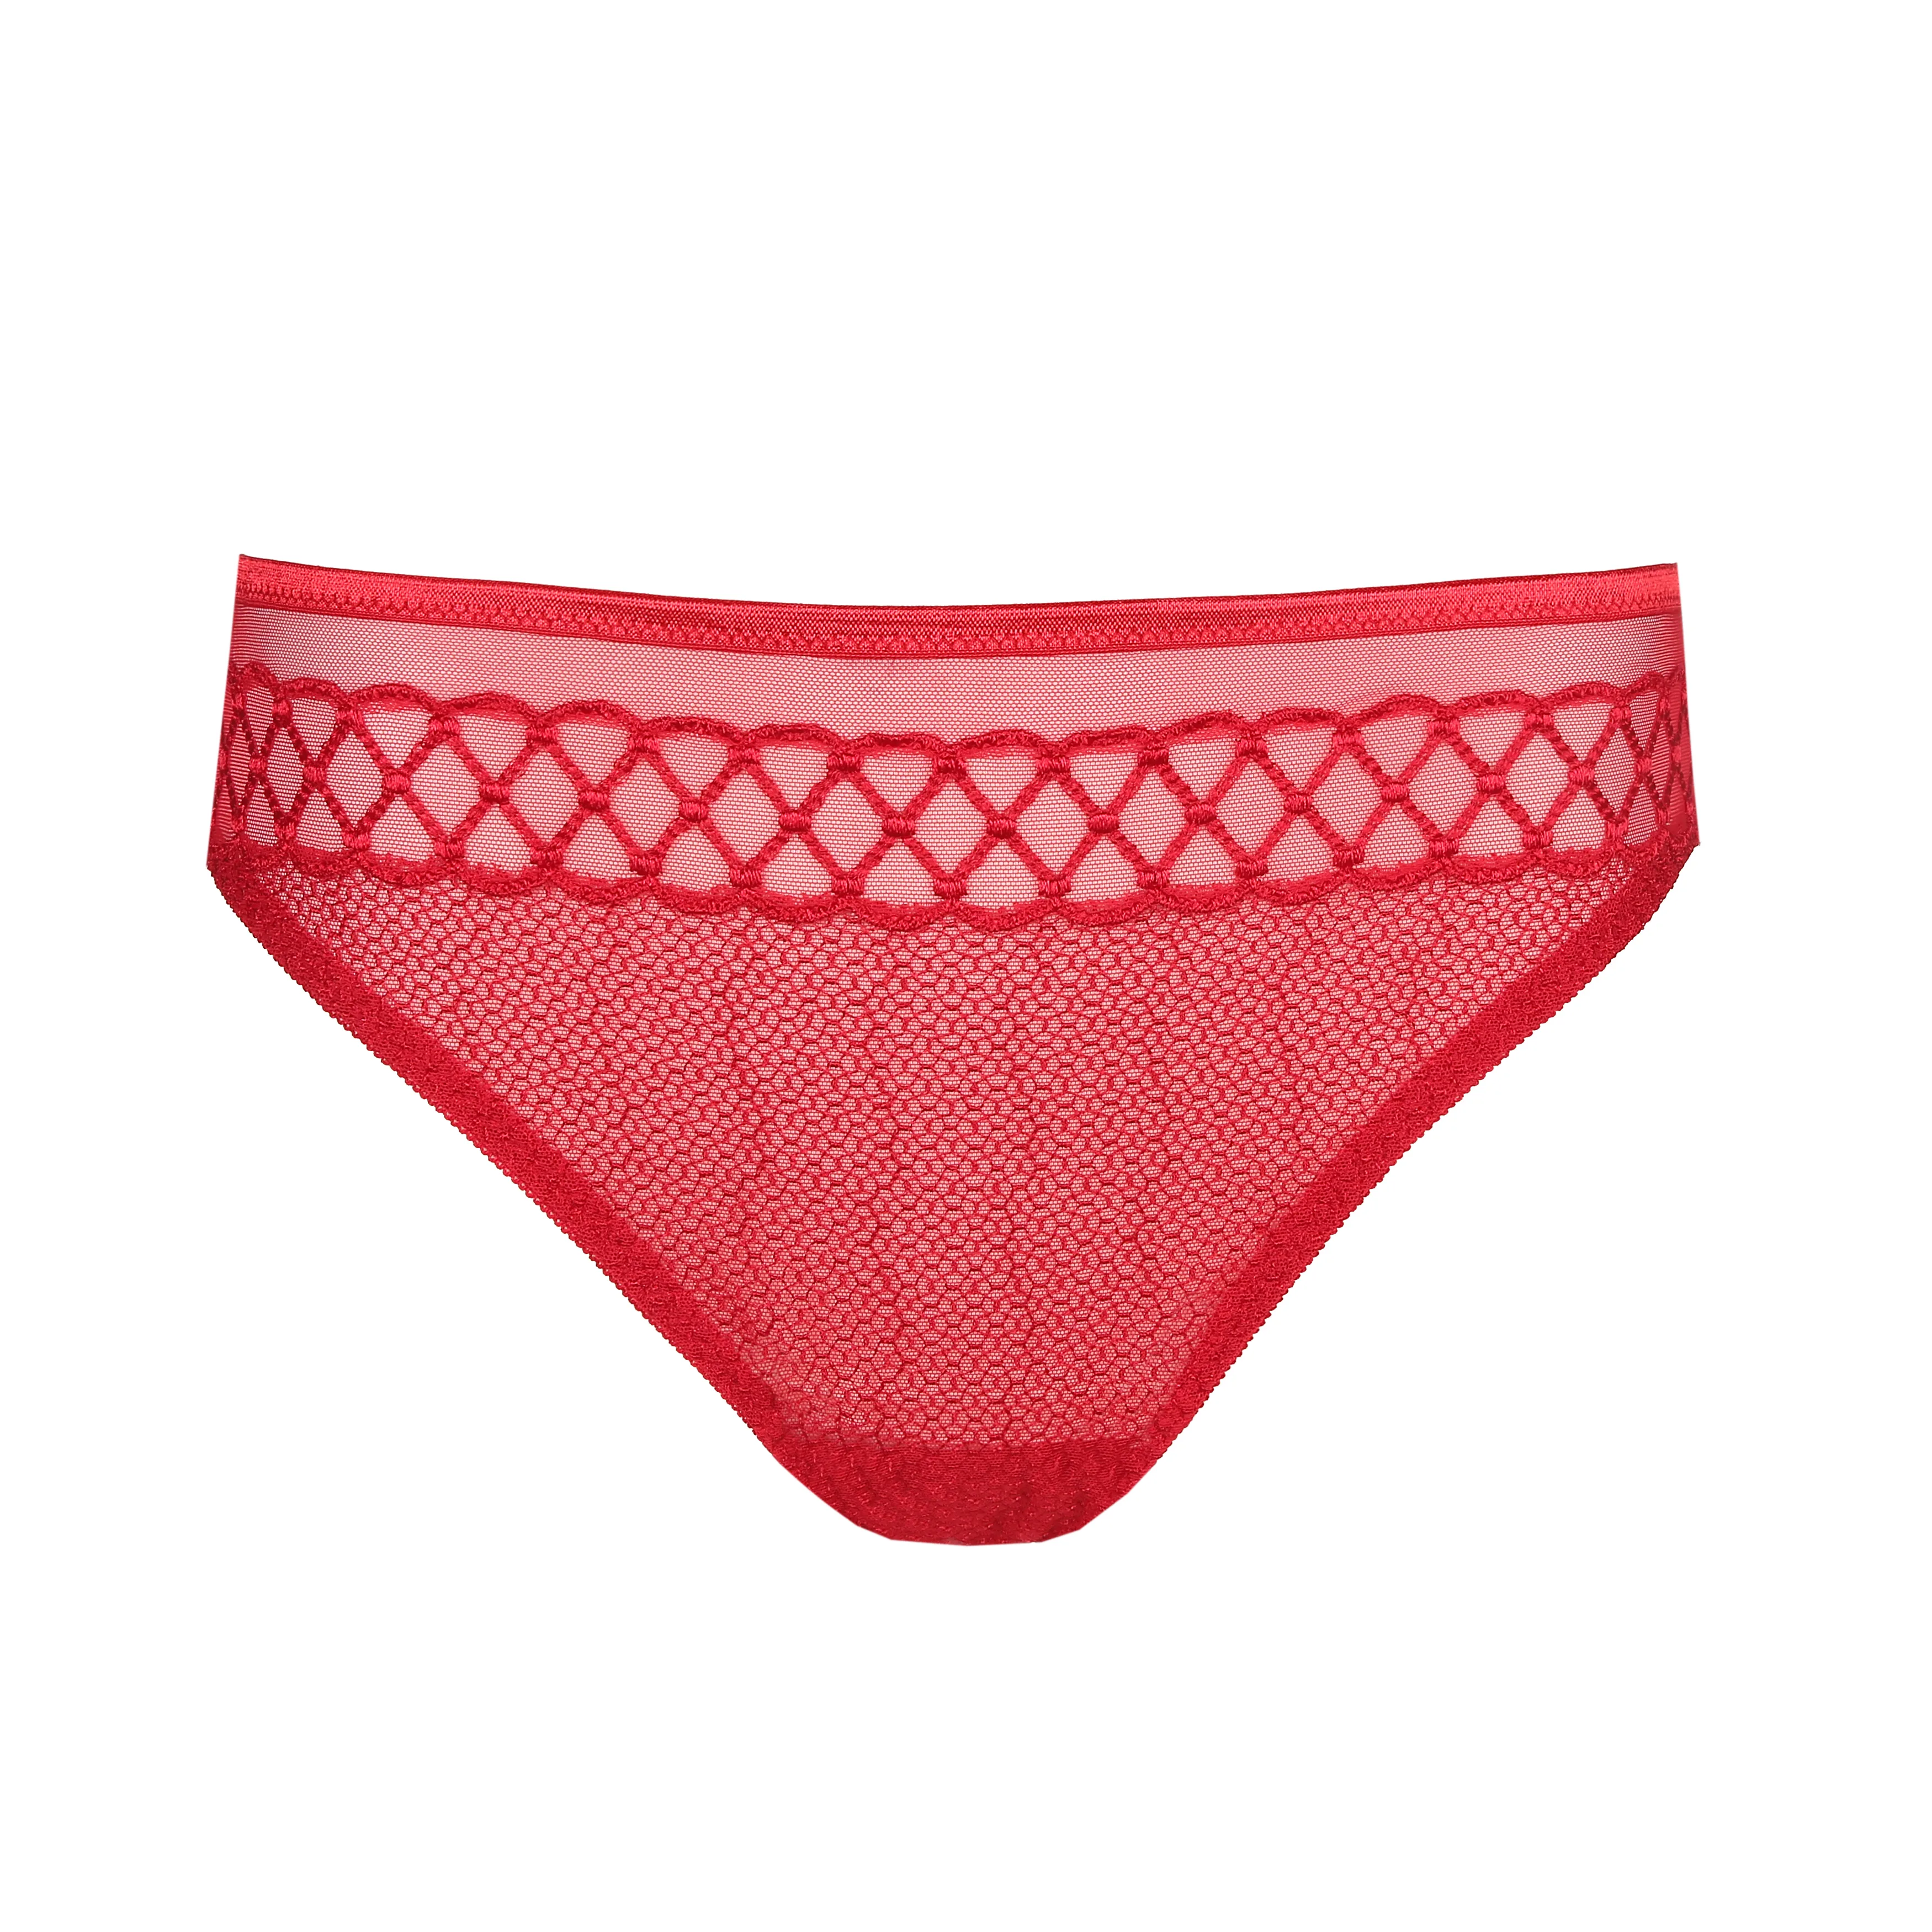 Panties - Discover our collection